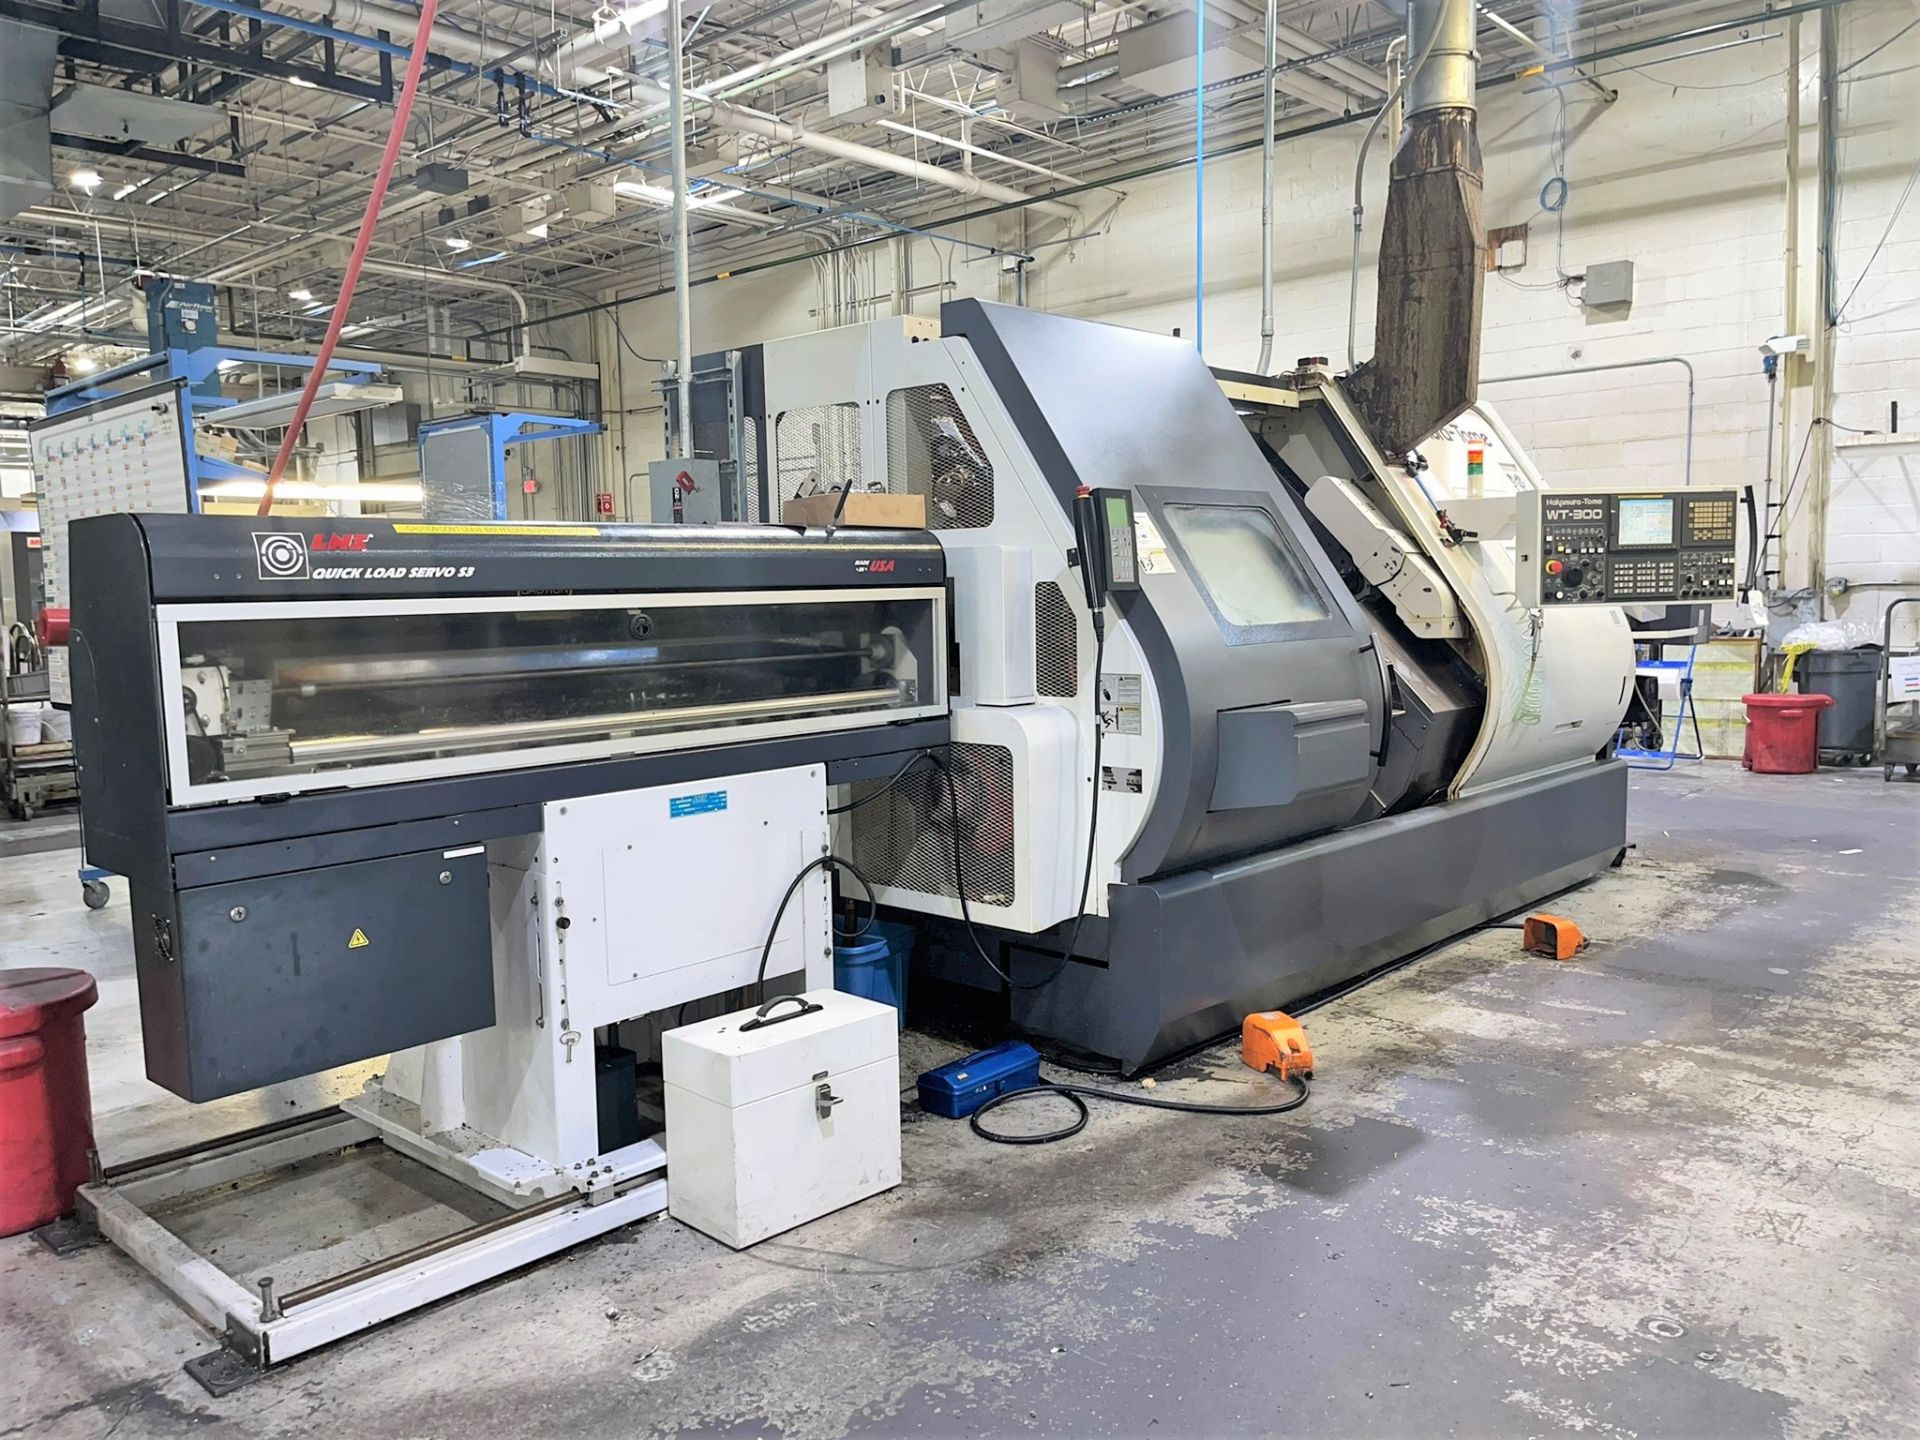 2011 Nakamura Tome WT-300 8-Axis CNC Turning/Milling Center, S/N M303110 - Image 2 of 20